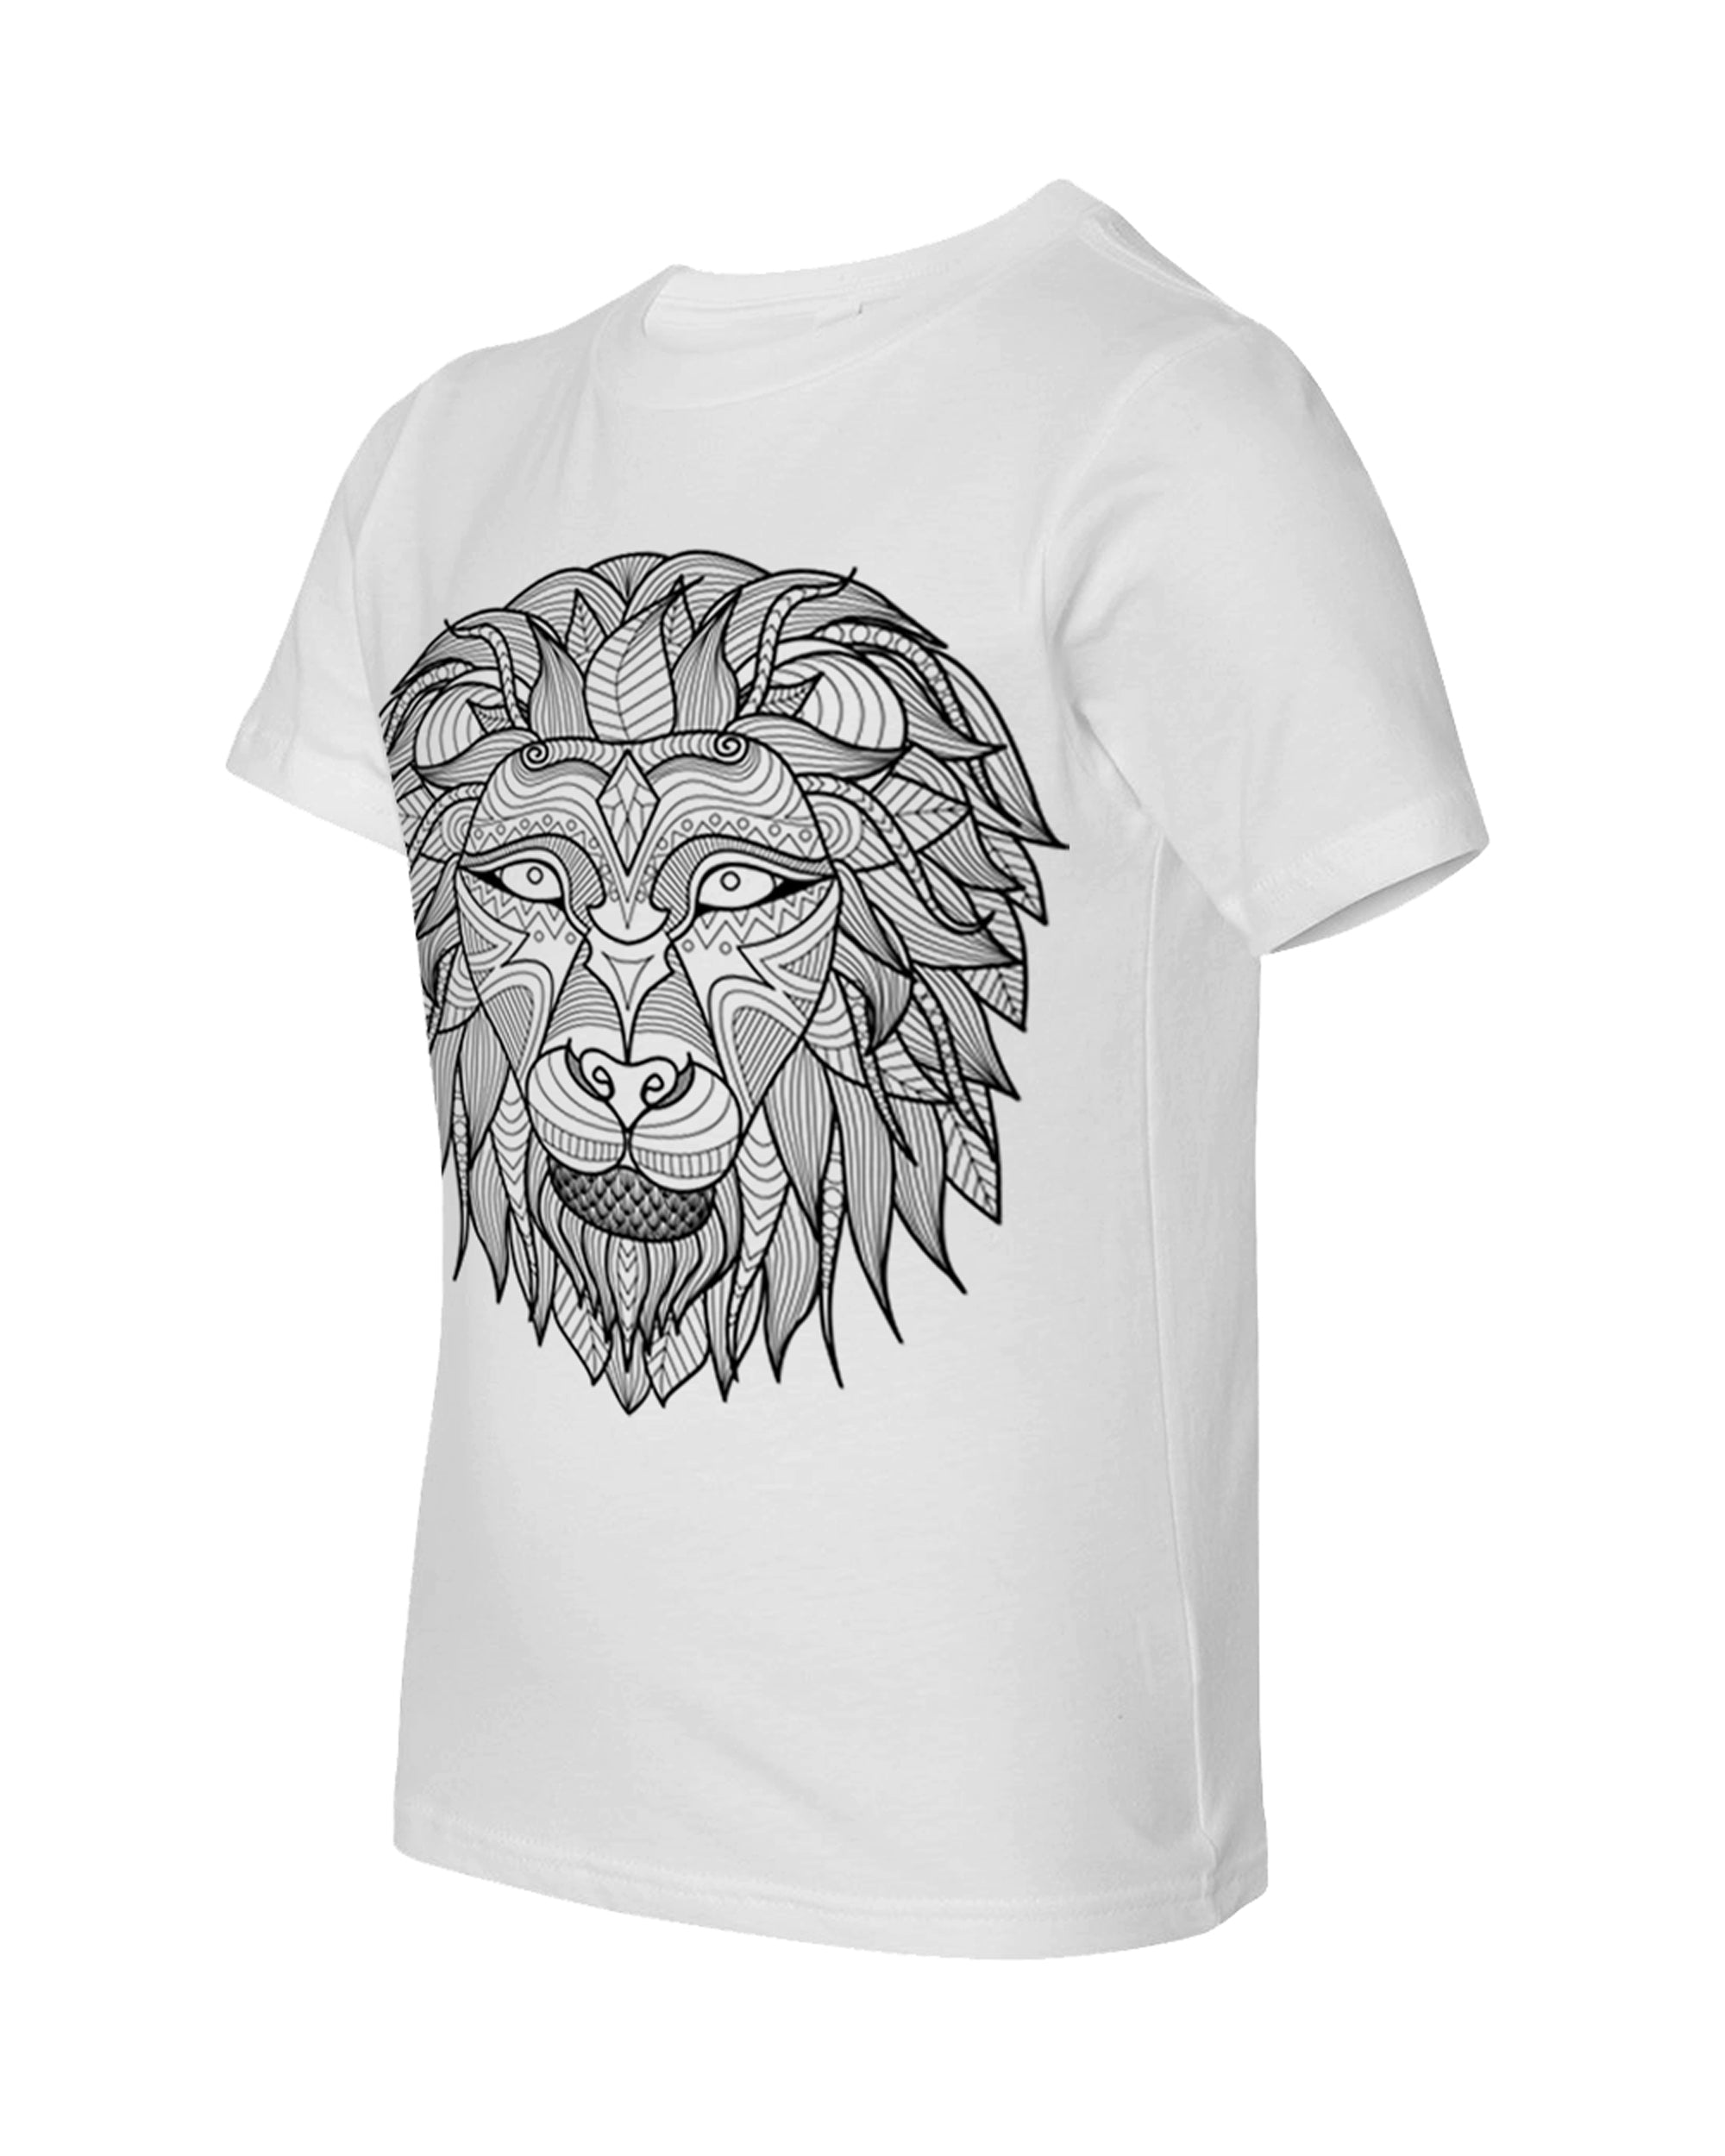 Kid's Coloring Lion White T Shirt - Adorned By You